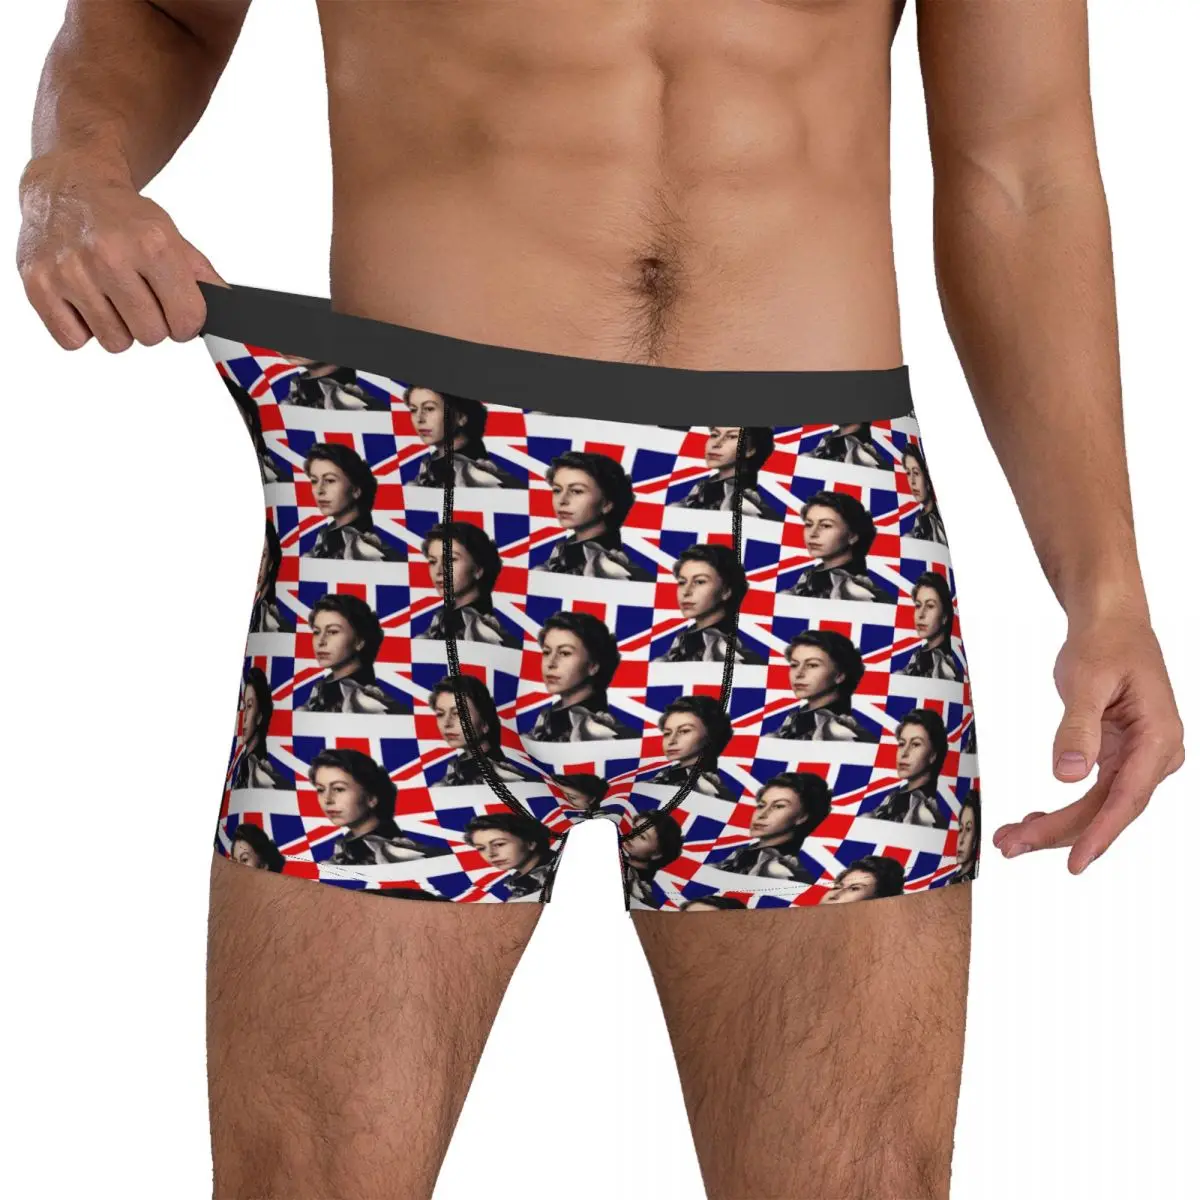 Formal With British Flag Underwear Queen Elizabeth II Design Boxer Shorts High Quality Male Panties Breathable Boxer Brief Gift